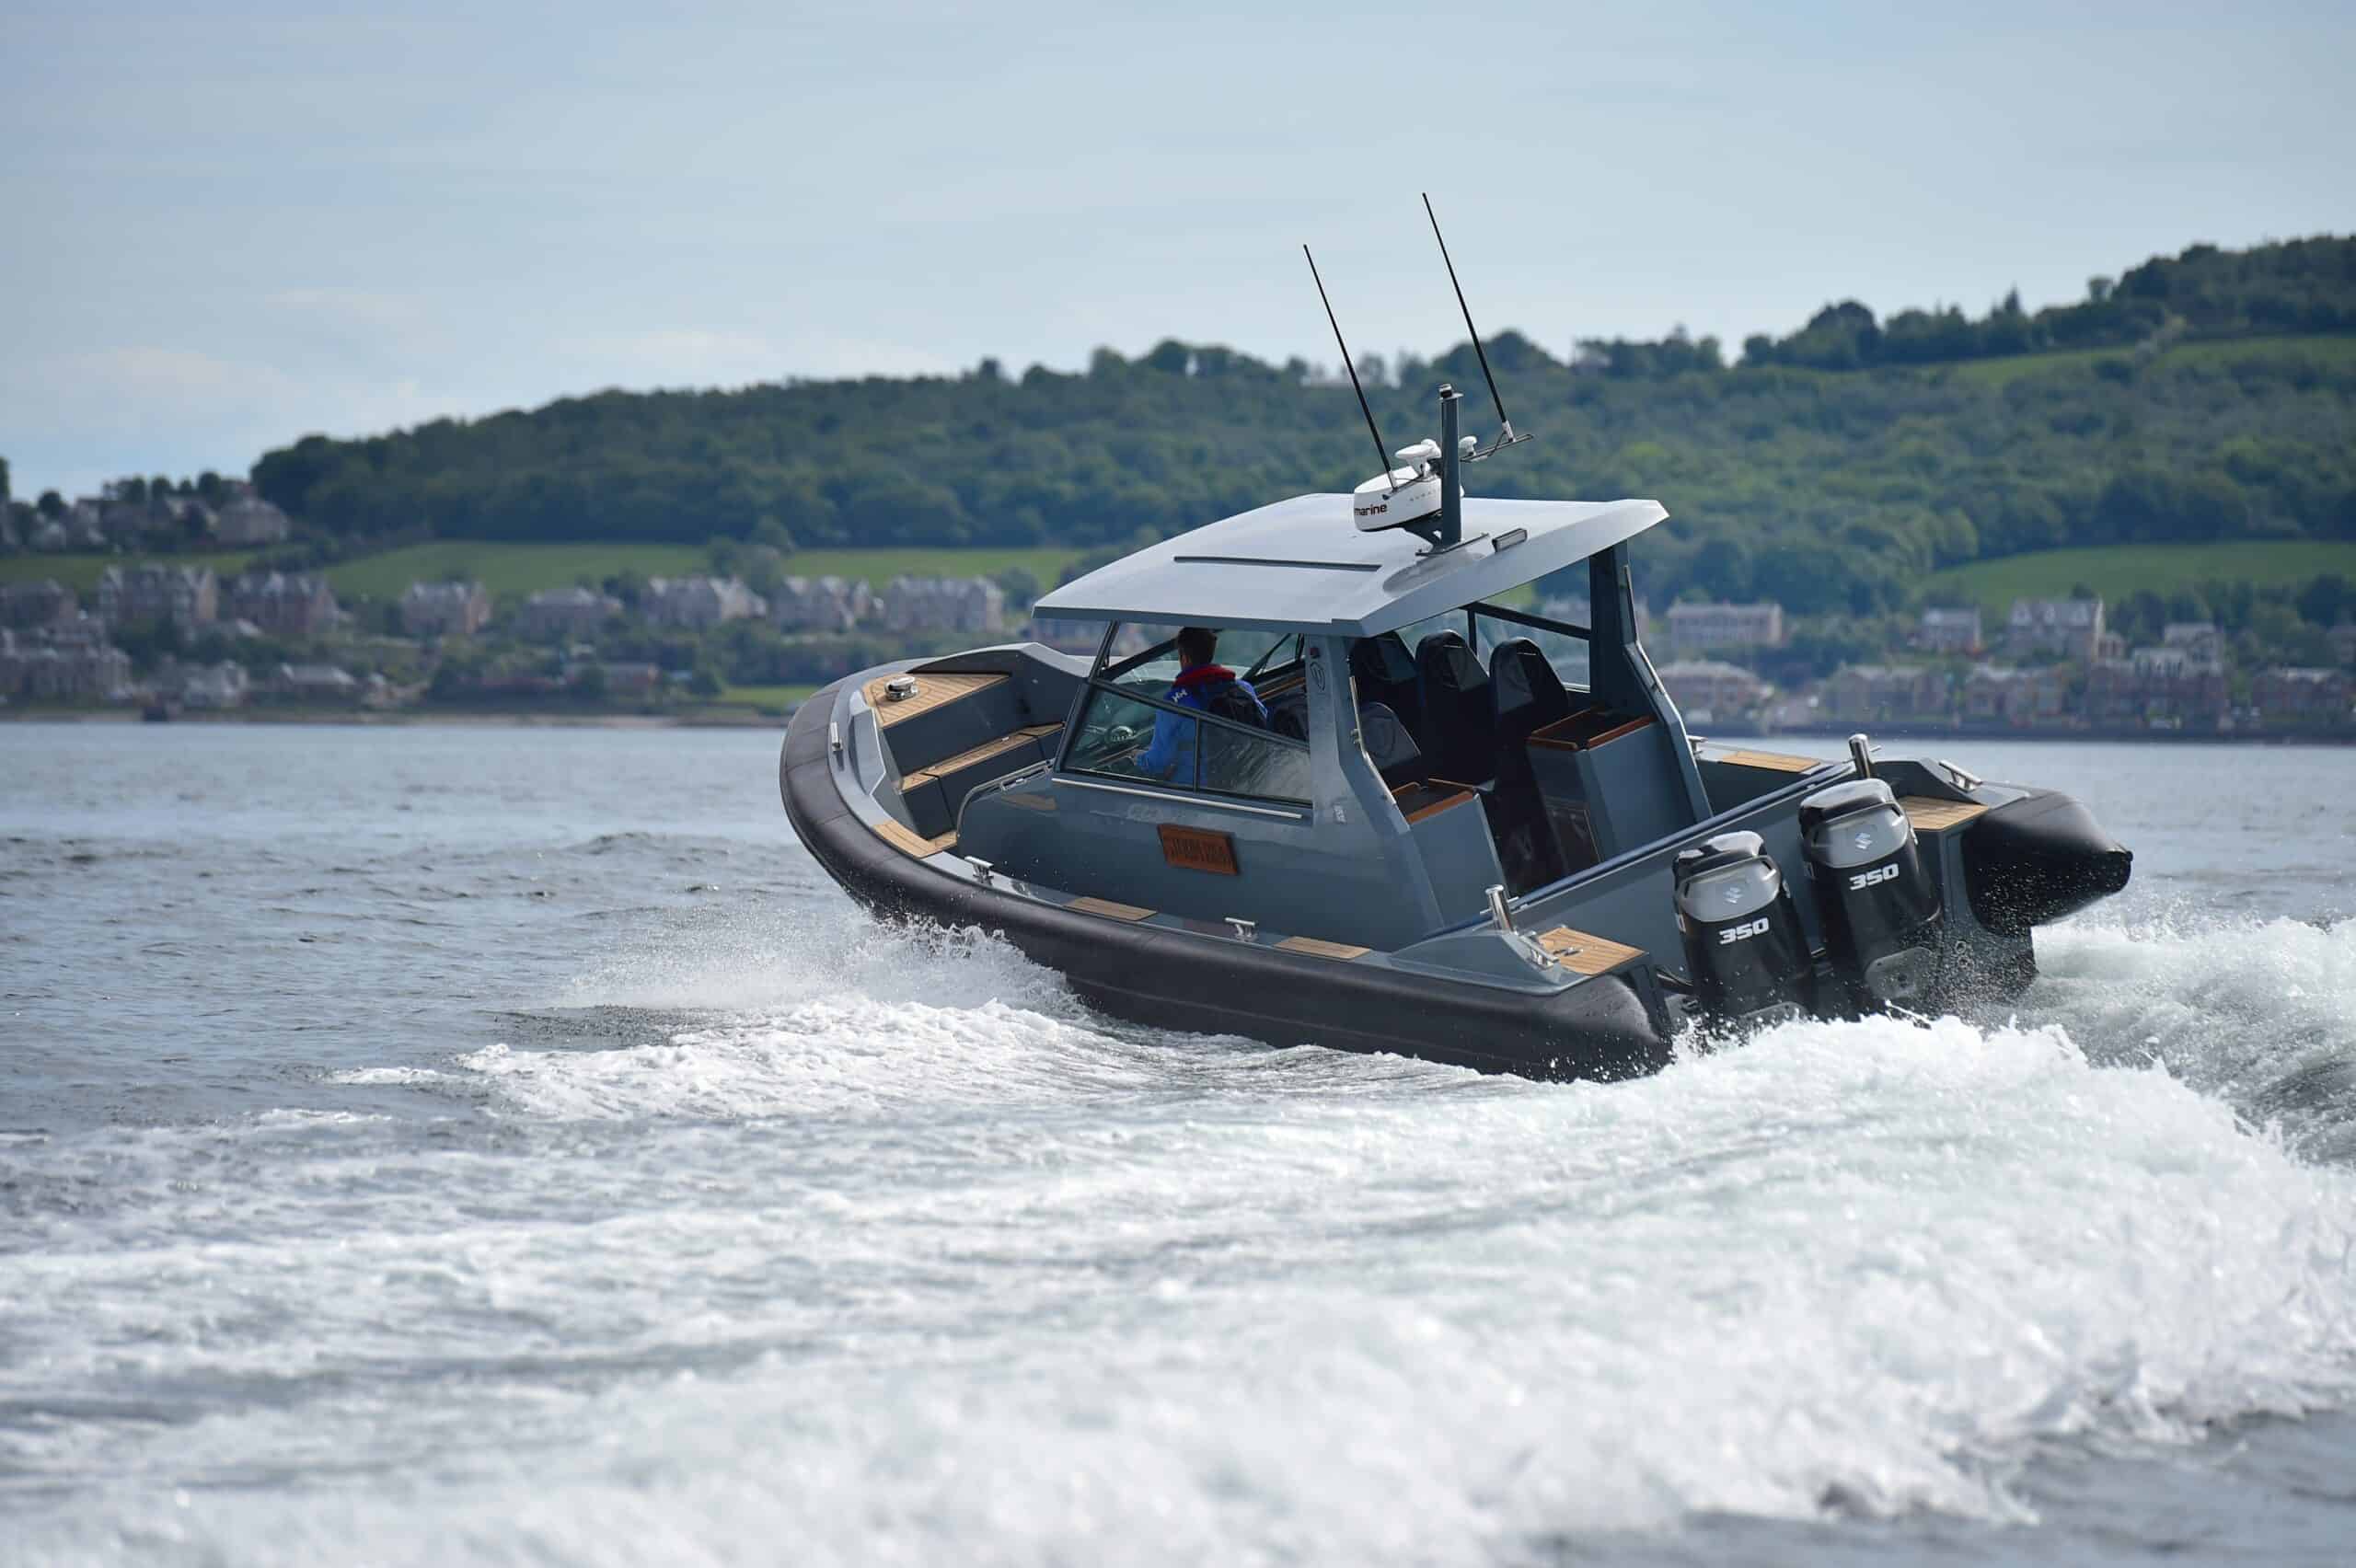 World launch of Two New High-Performance Craft From The Ultimate Boat Company @ RIBs ONLY - Home of the Rigid Inflatable Boat